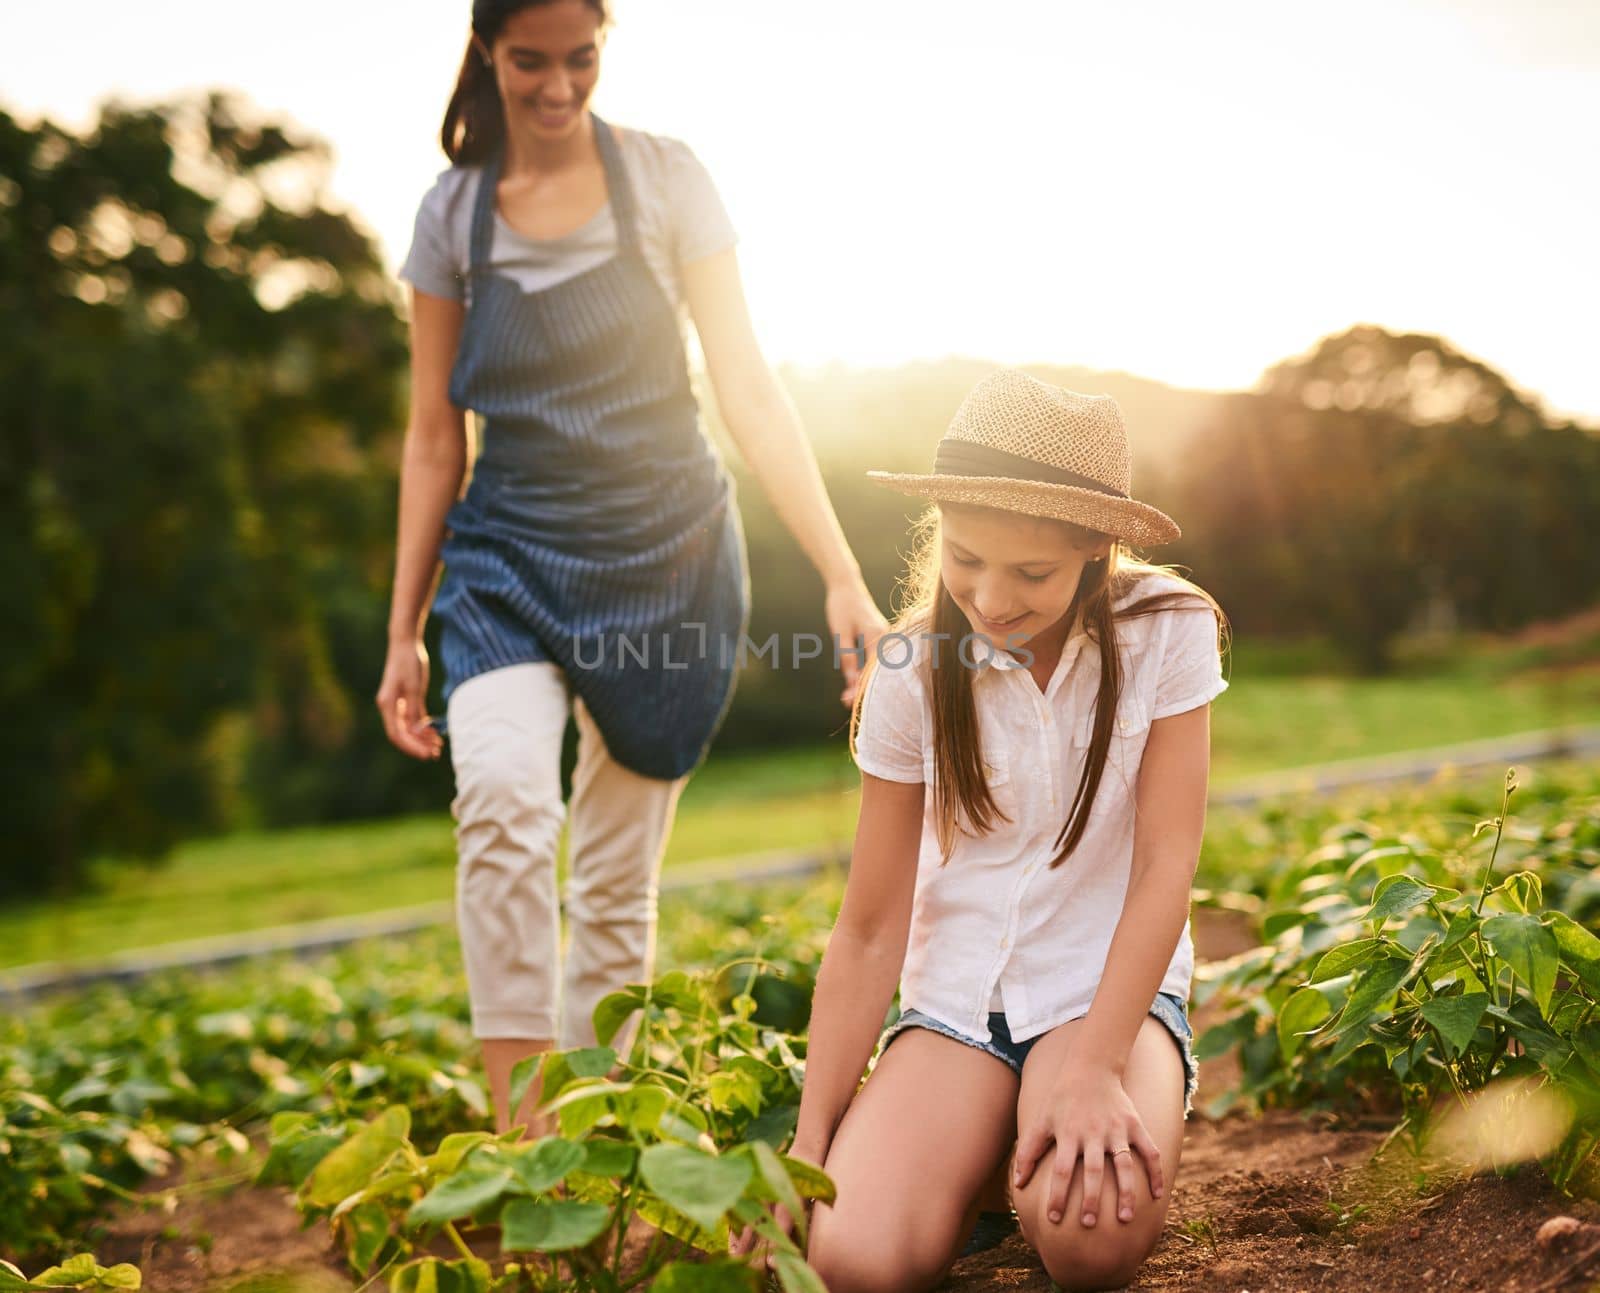 Its a family tradition. a young girl working on the family farm with her mother in the background